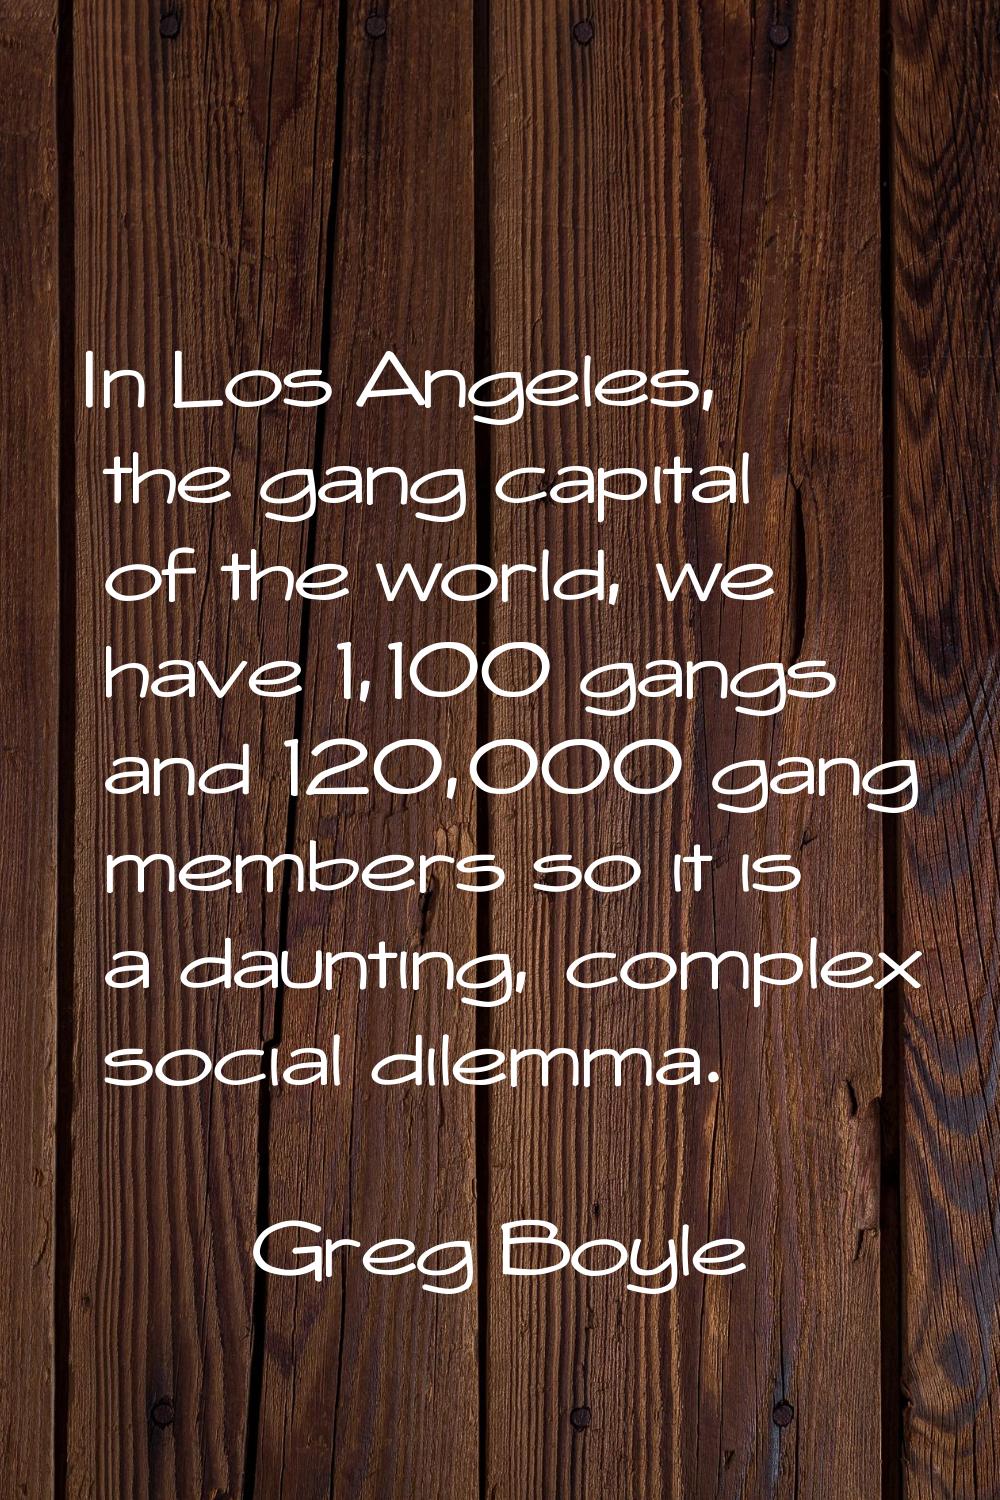 In Los Angeles, the gang capital of the world, we have 1,100 gangs and 120,000 gang members so it i